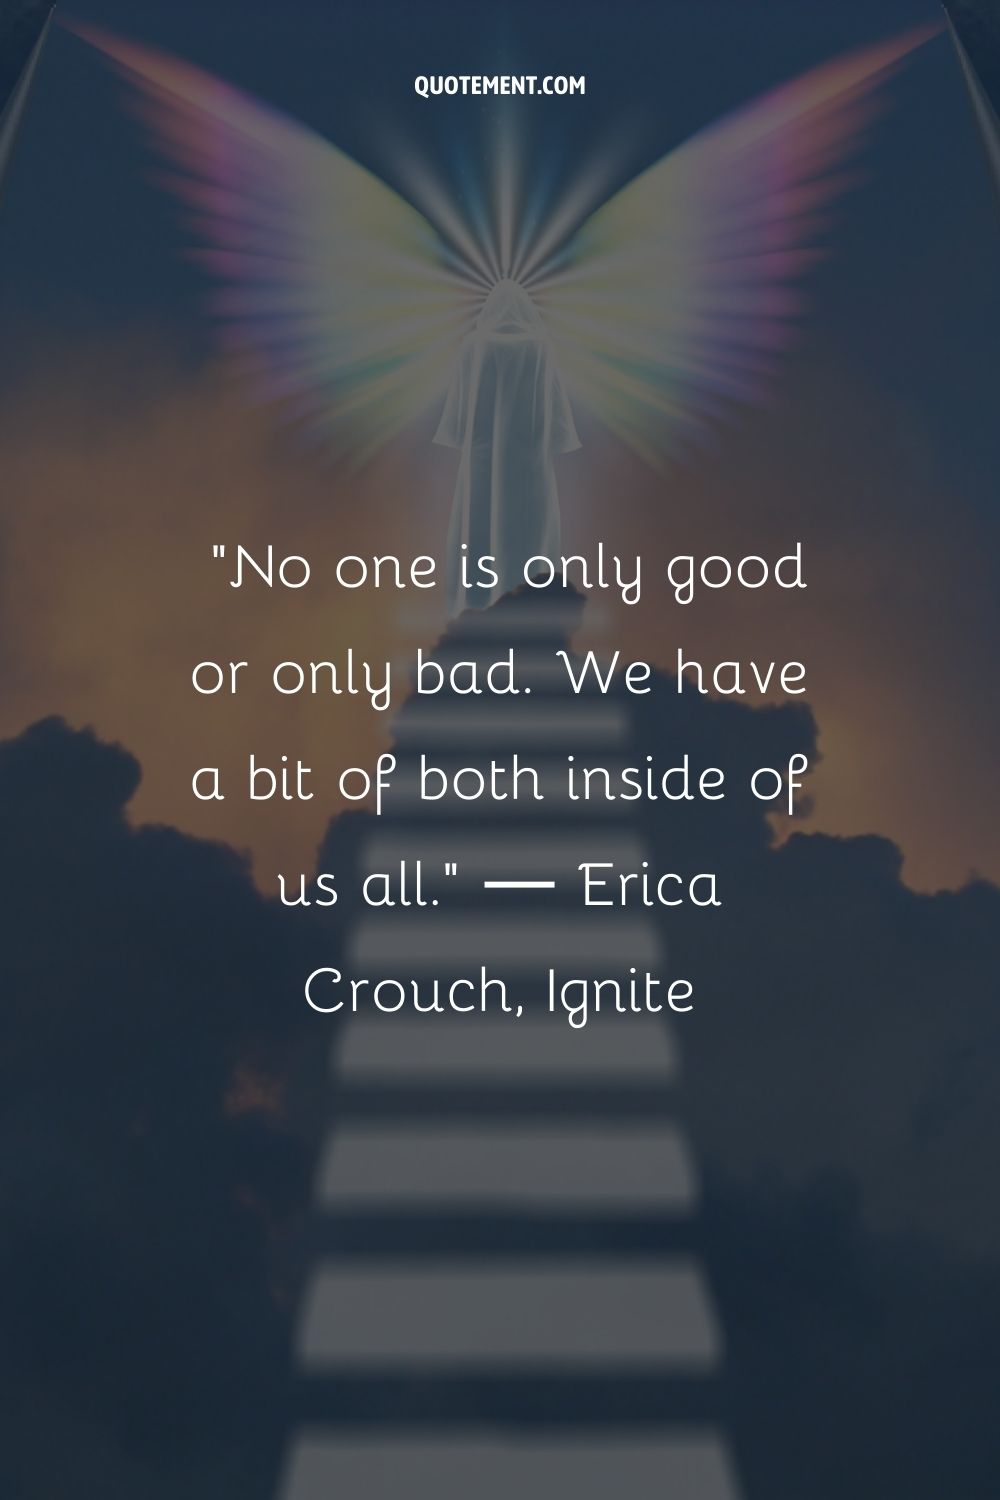 No one is only good or only bad. We have a bit of both inside of us all.